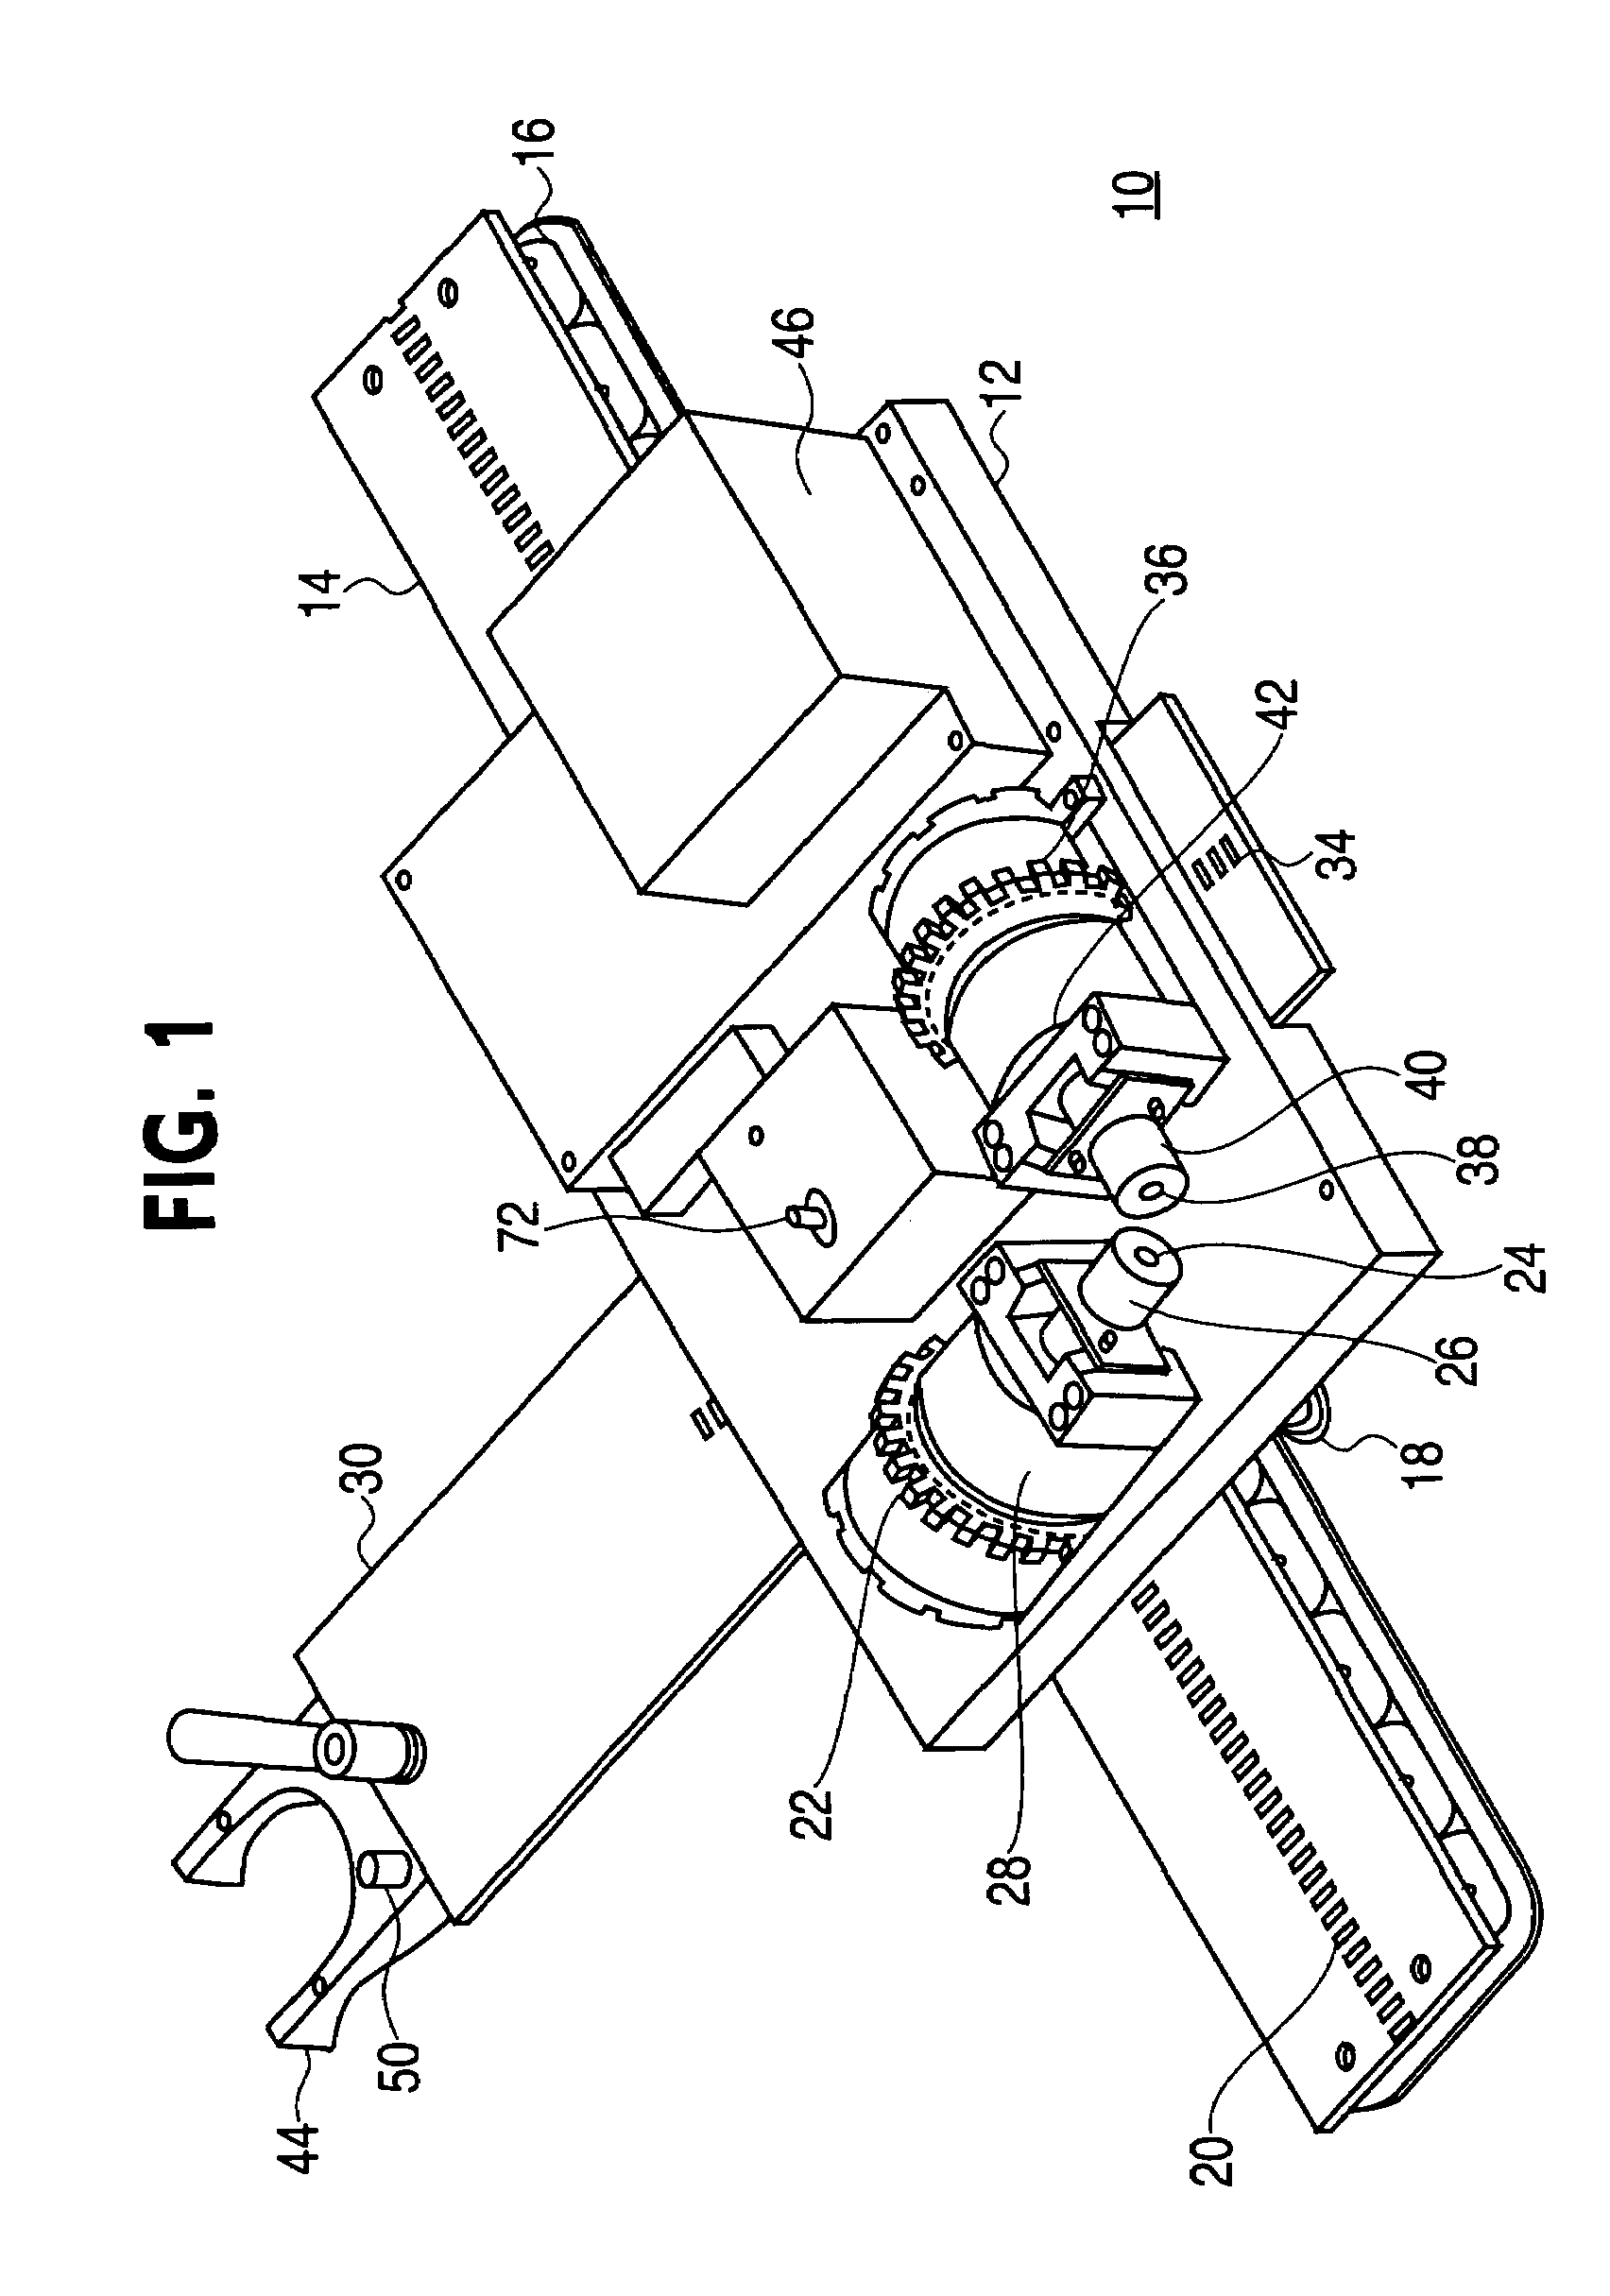 Automatic position-locking tool carrier apparatus and method